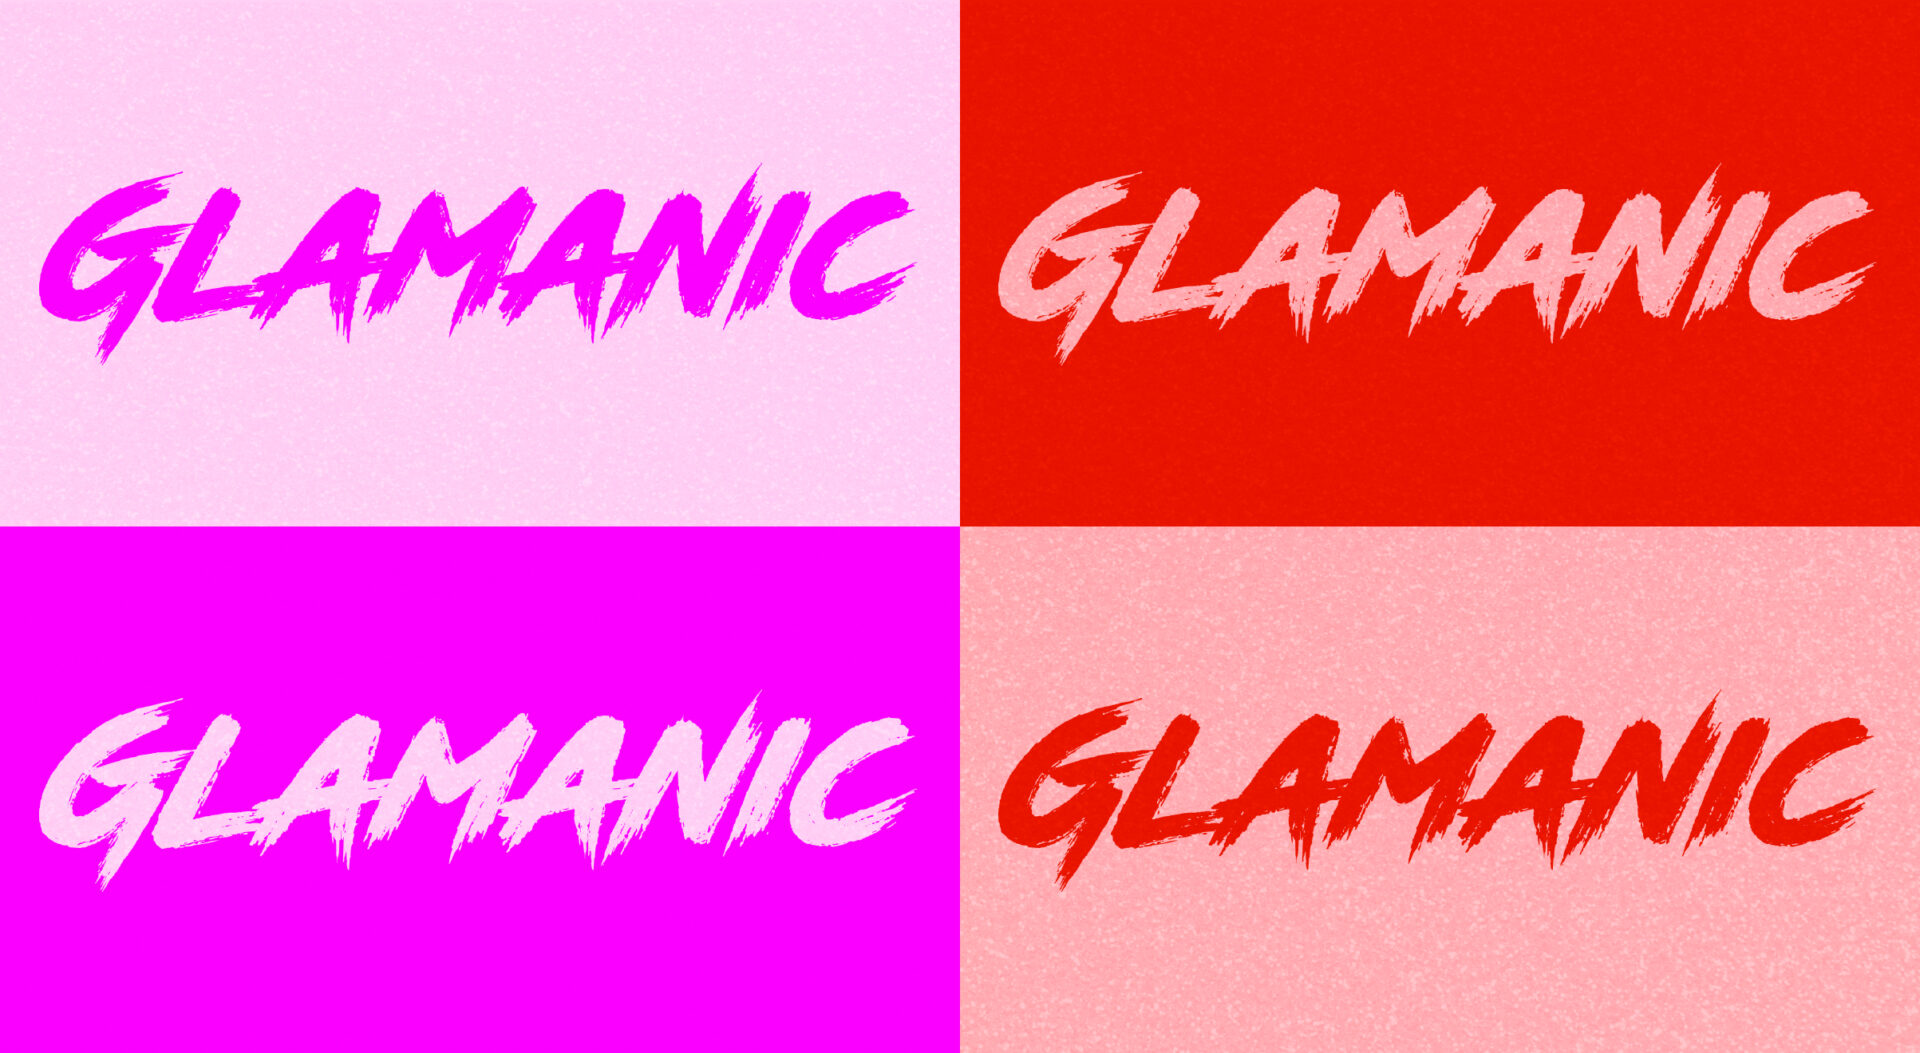 The Glamanic logo is confident in style and gives the impression it is written by hand.